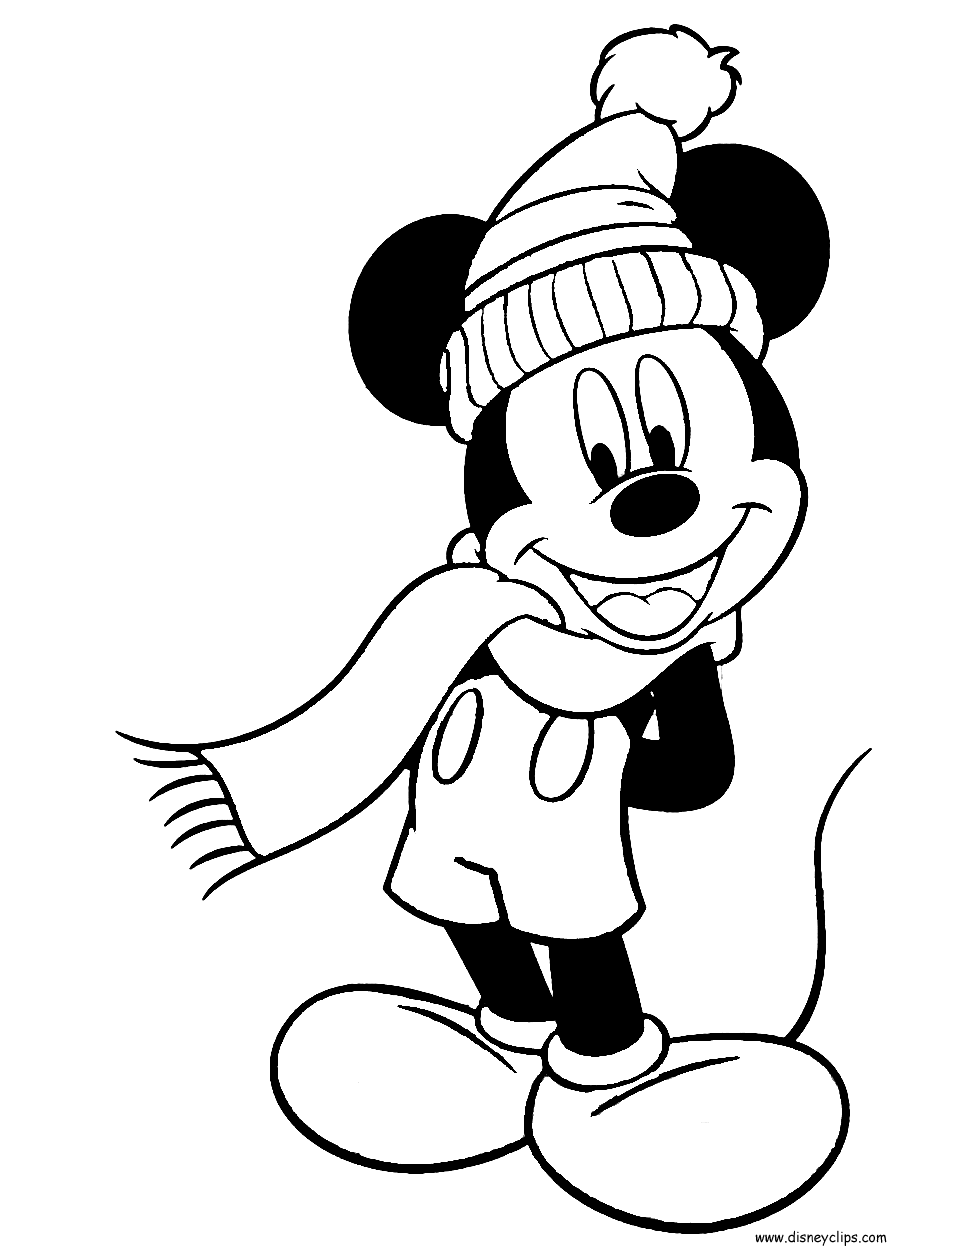 printable-mickey-mouse-coloring-pages-printable-world-holiday